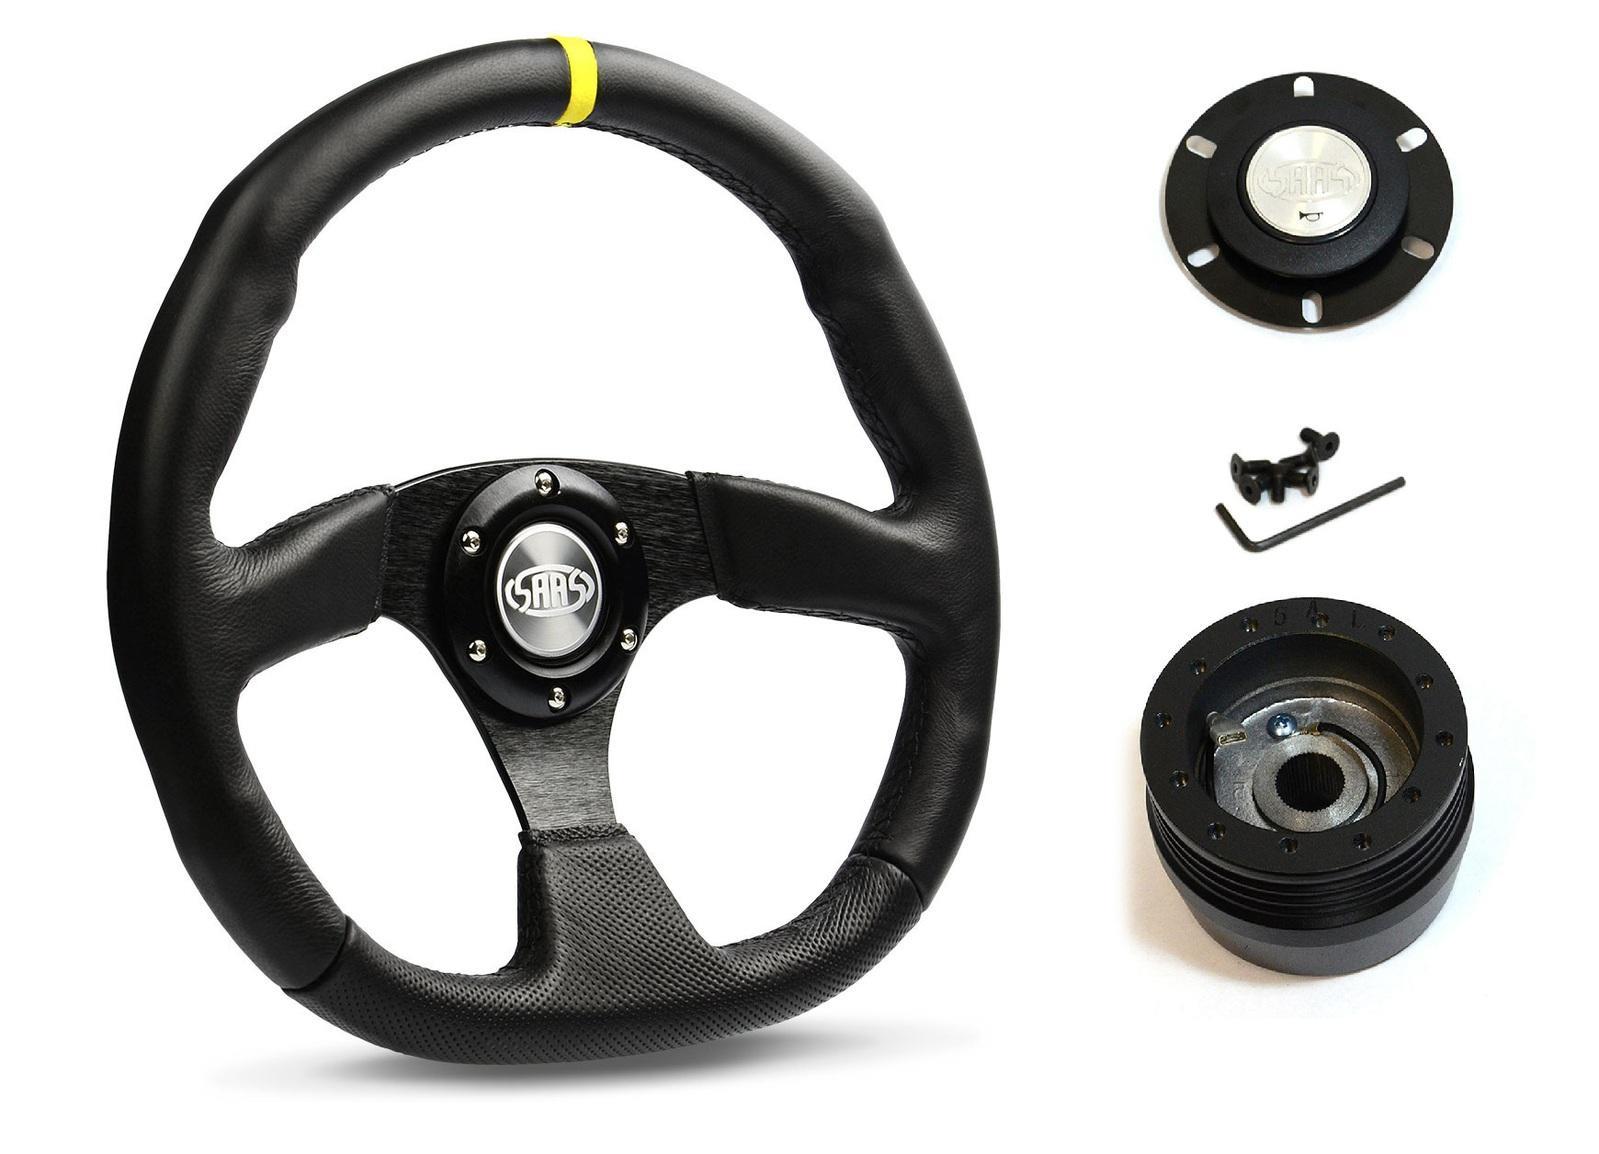 SAAS Steering Wheel Leather 14" ADR Black Flat Bottom + Indicator D1-SWB-F2 and SAAS boss kit for Ford Corsair All Models 1988-1996